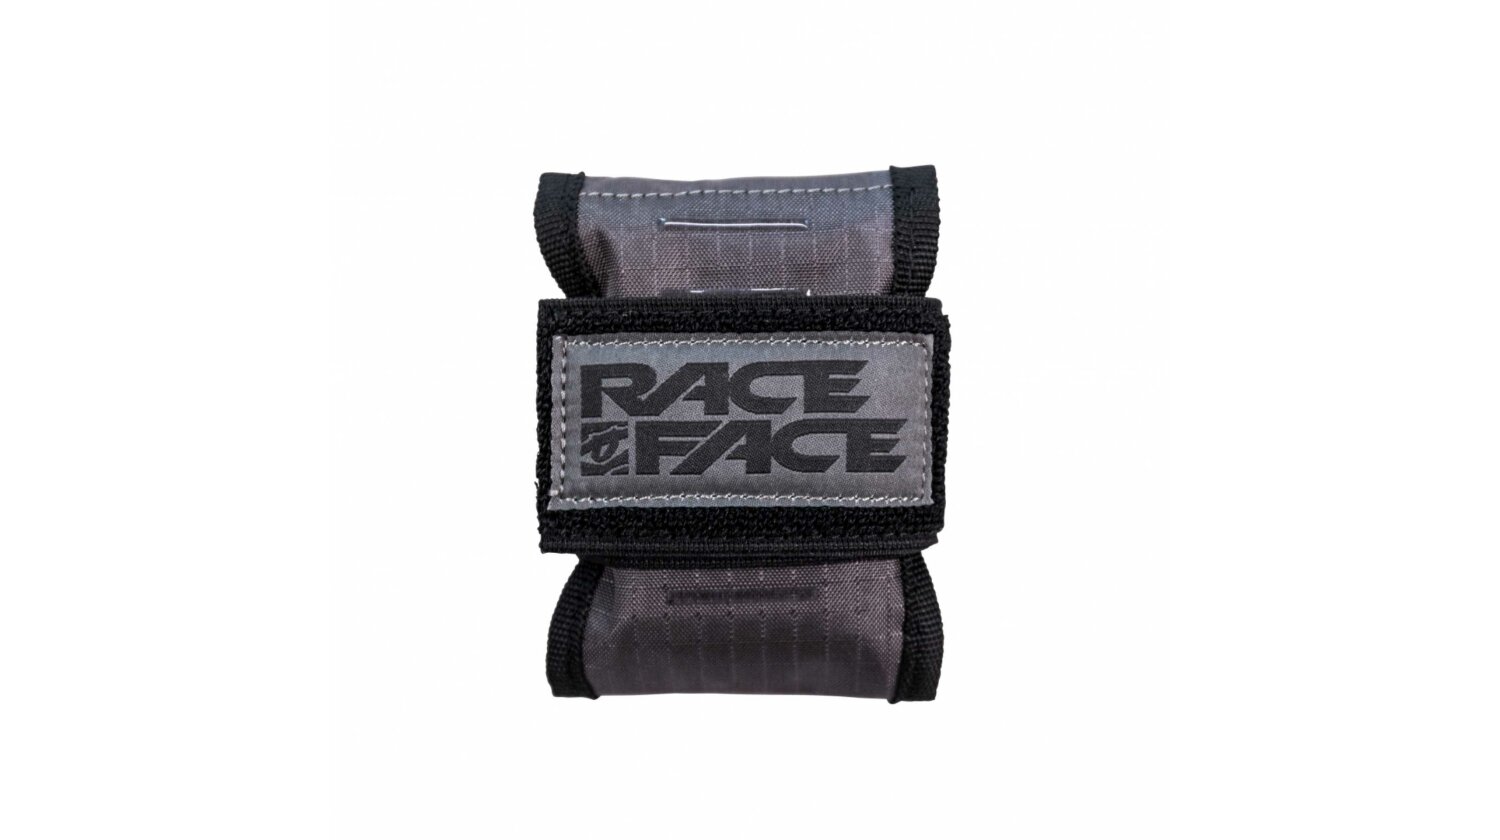 Race Face Stash Tool Wrap charcoal one size